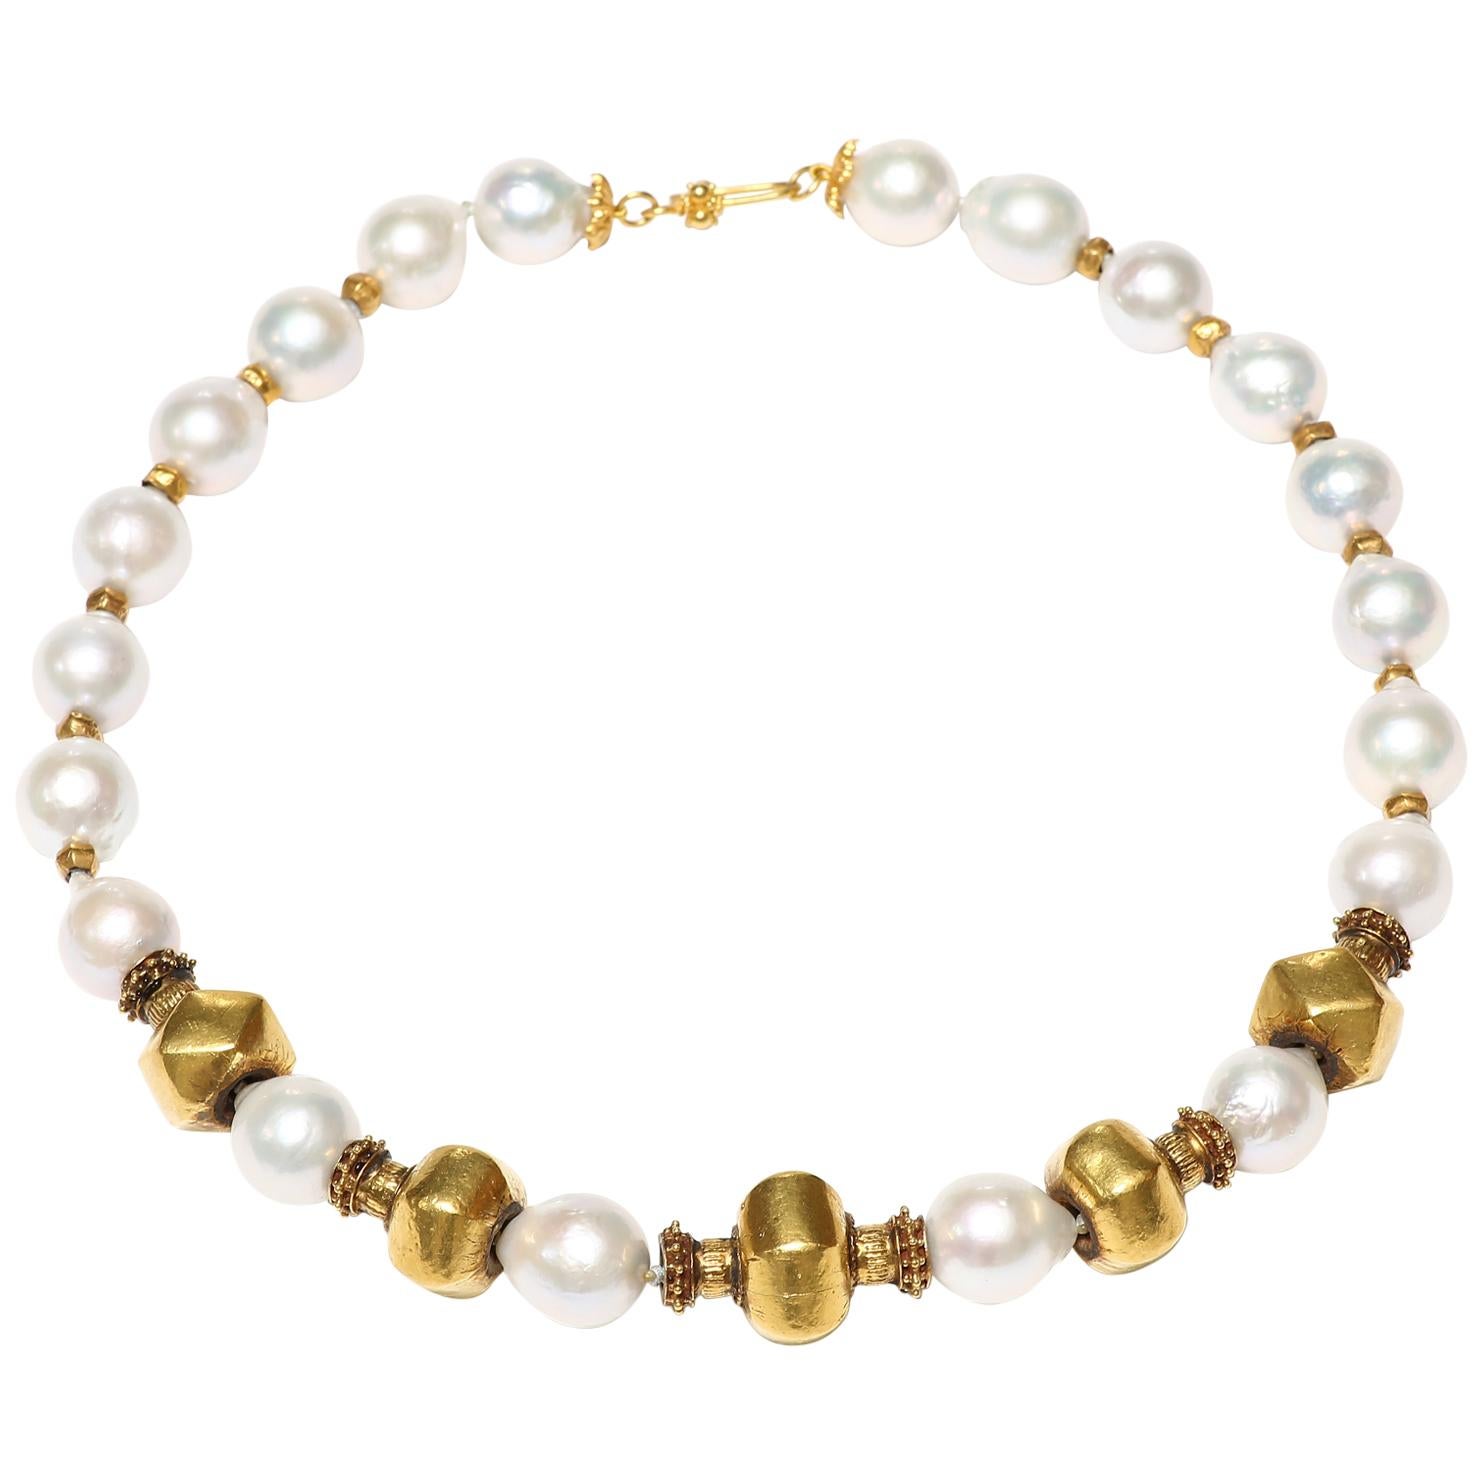 Freshwater Pearl and Old Wax Gold Necklace